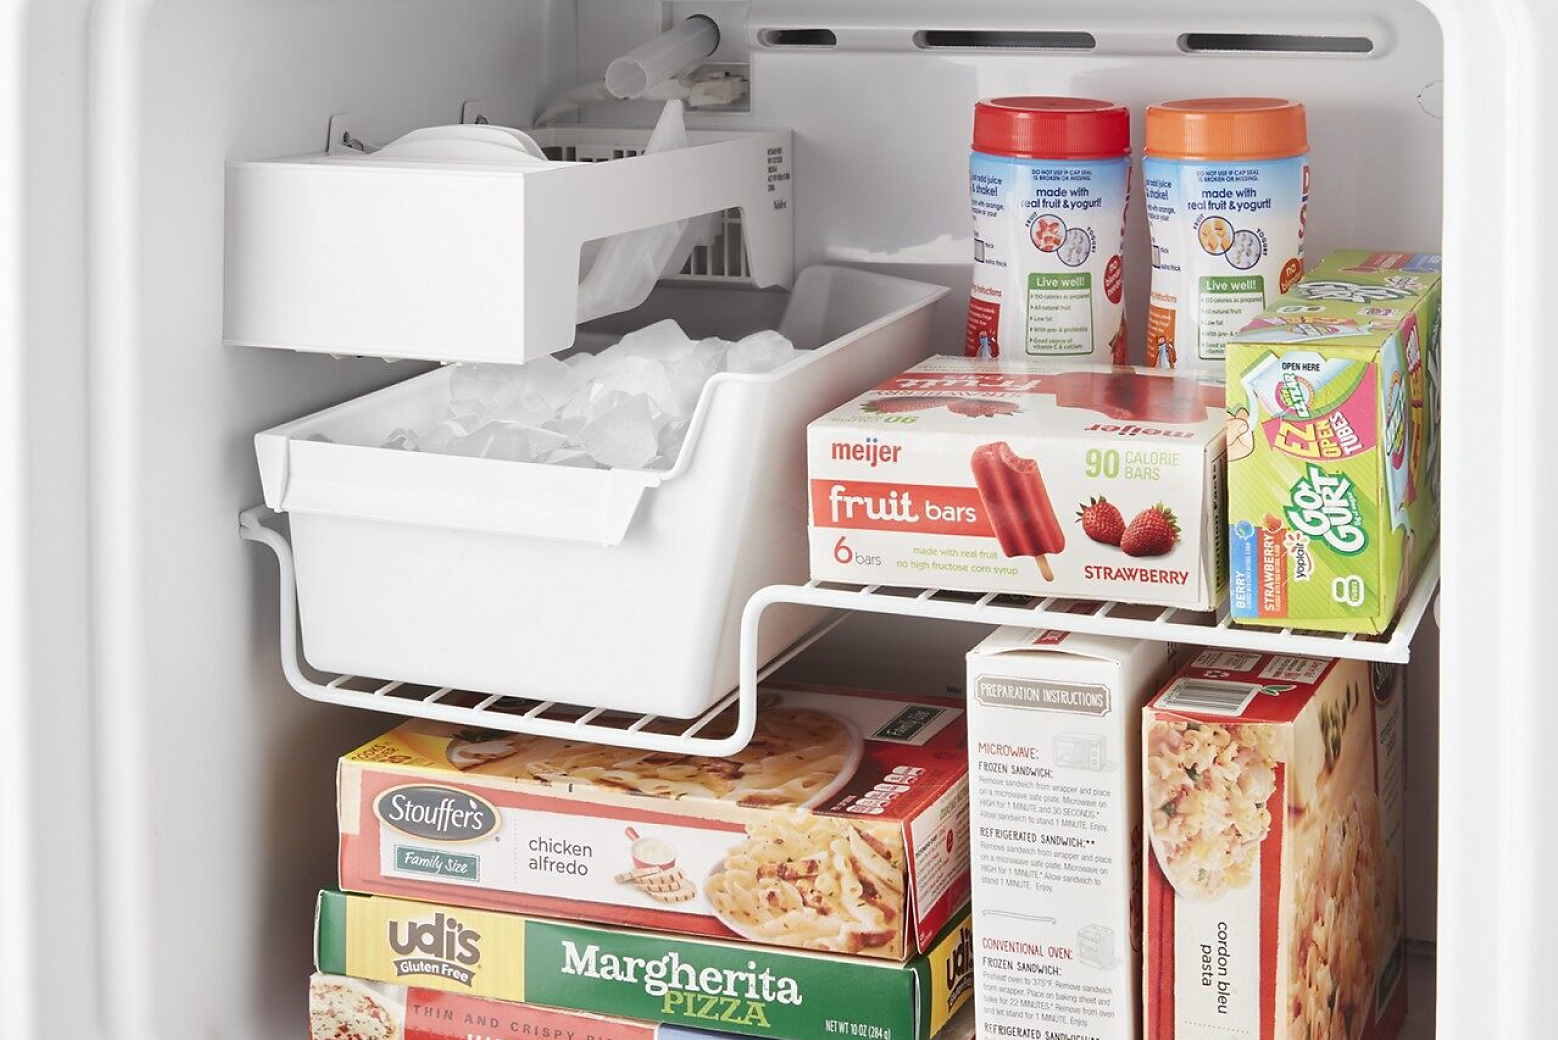 Freezer Icing Up? (Here's How To Fix It) – Pro Line Appliance